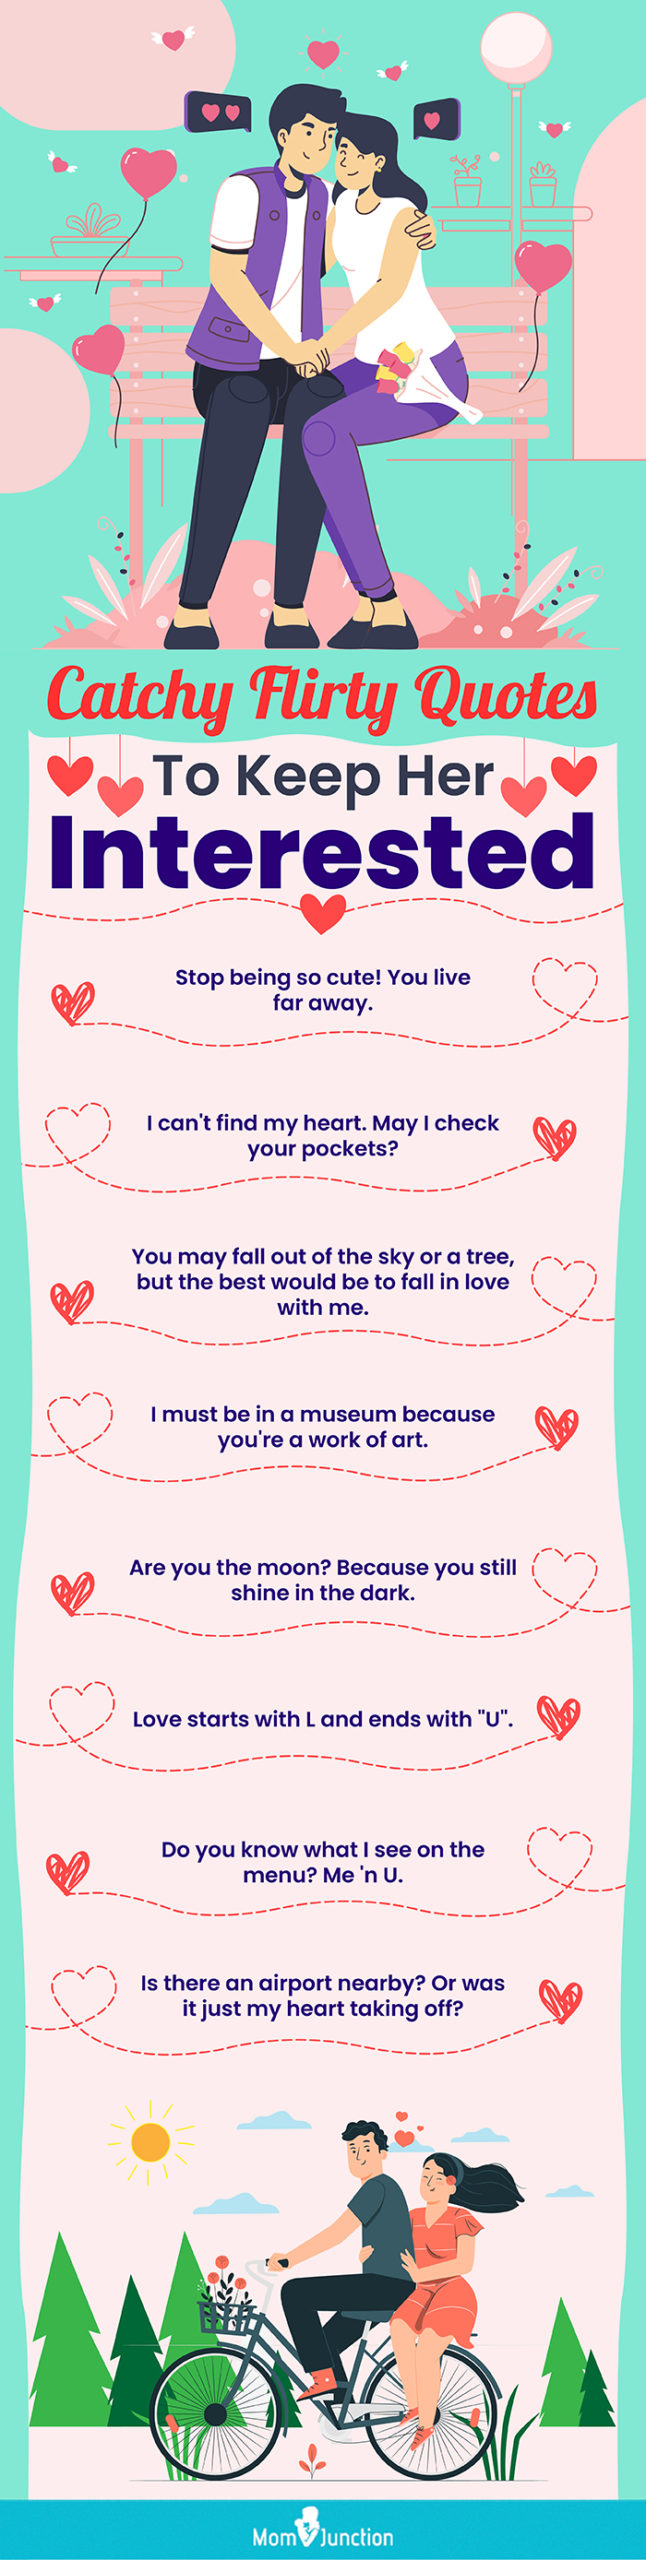 catchy flirty quotes to keep her interested (infographic)